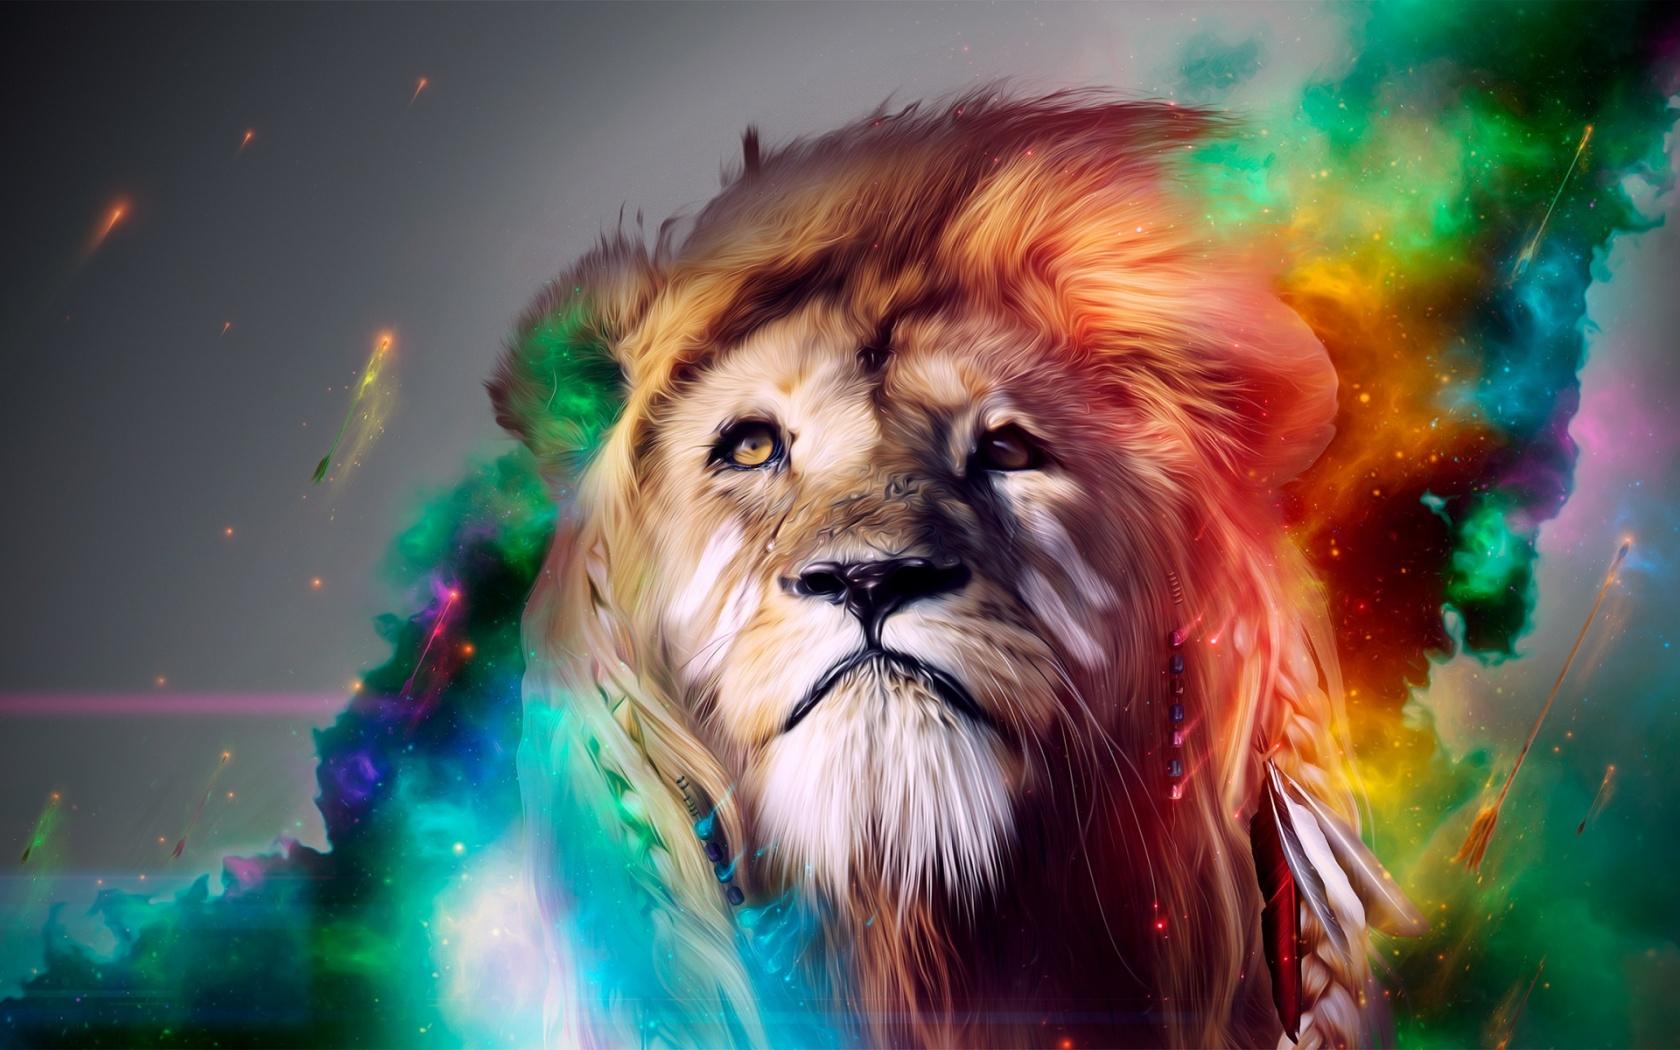 Lion Abstract Wallpaper in jpg format for free download